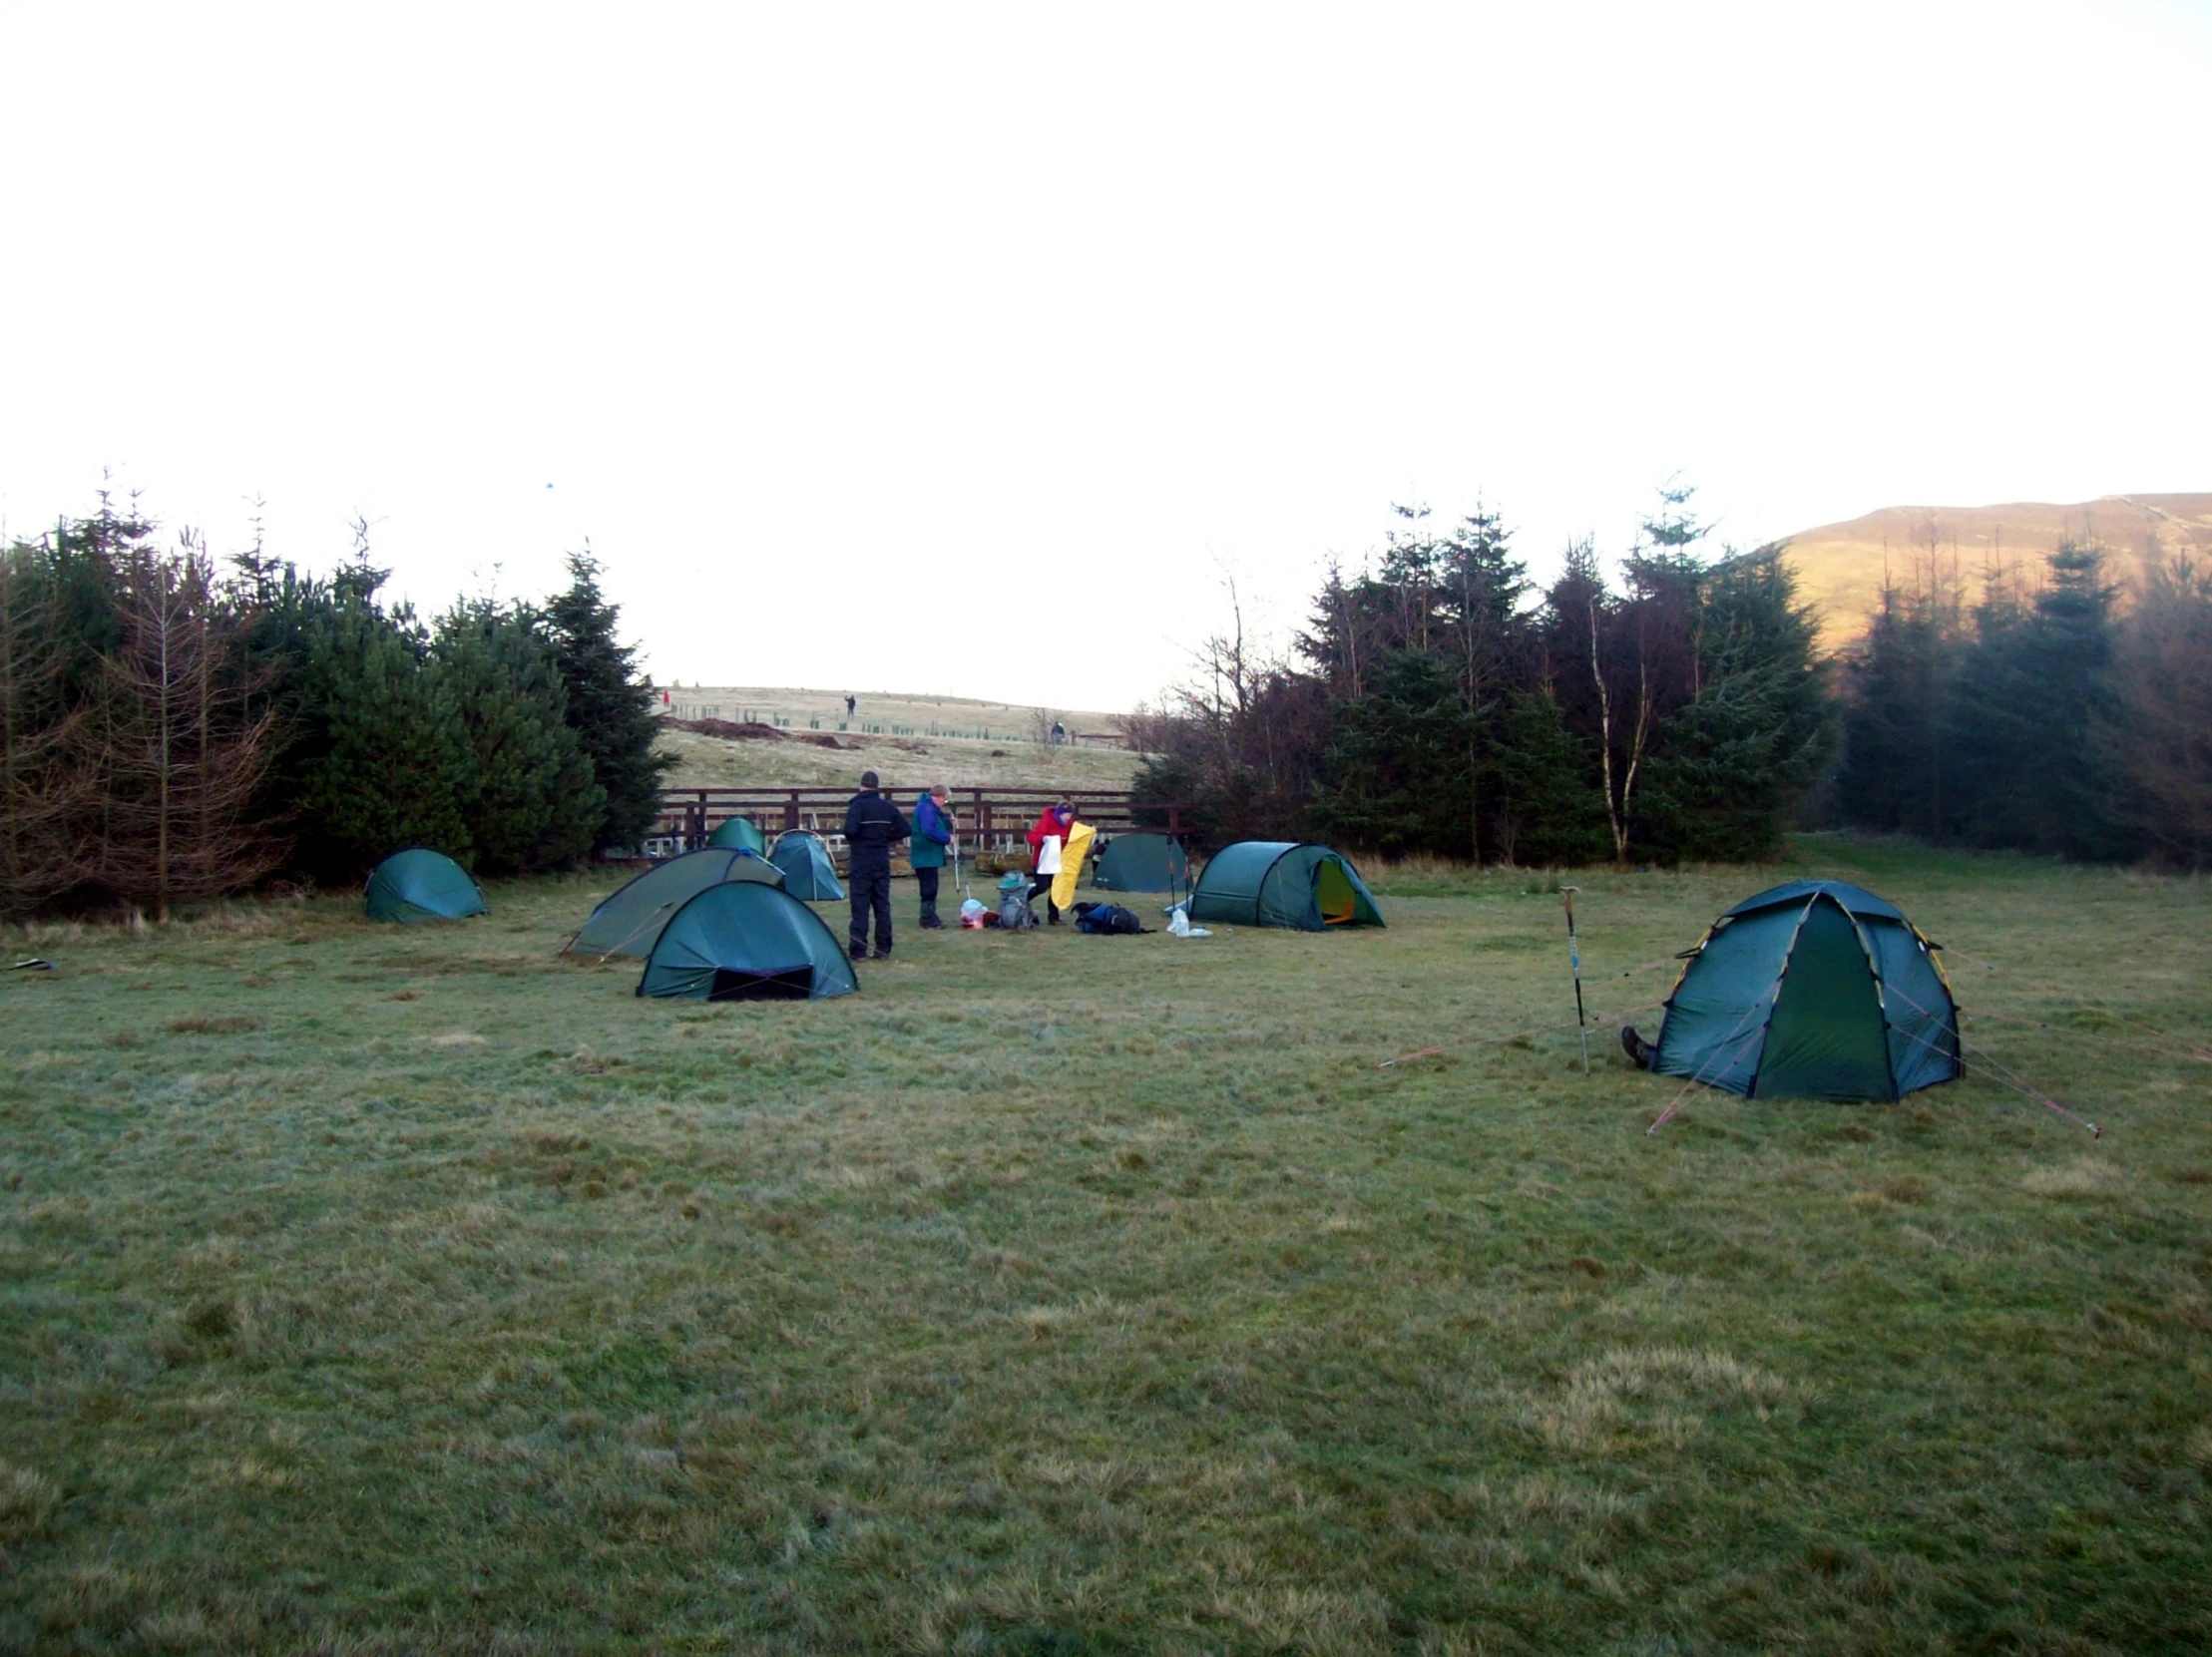 several tents pitched up in a grassy field